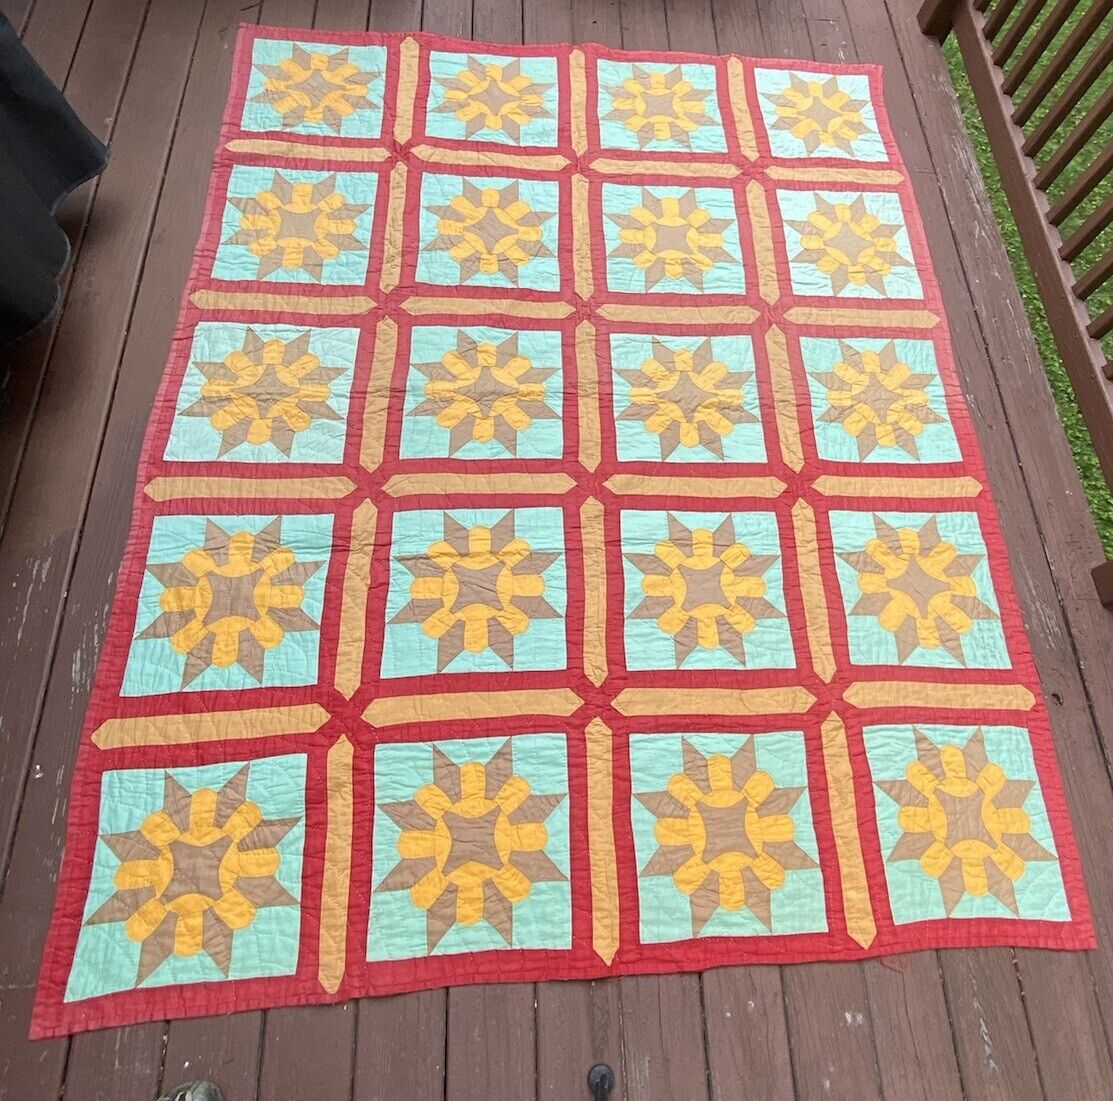 Vintage 1940’s 8 Point Star-Hand Stitched-Hand Made Quilt 72”x90”